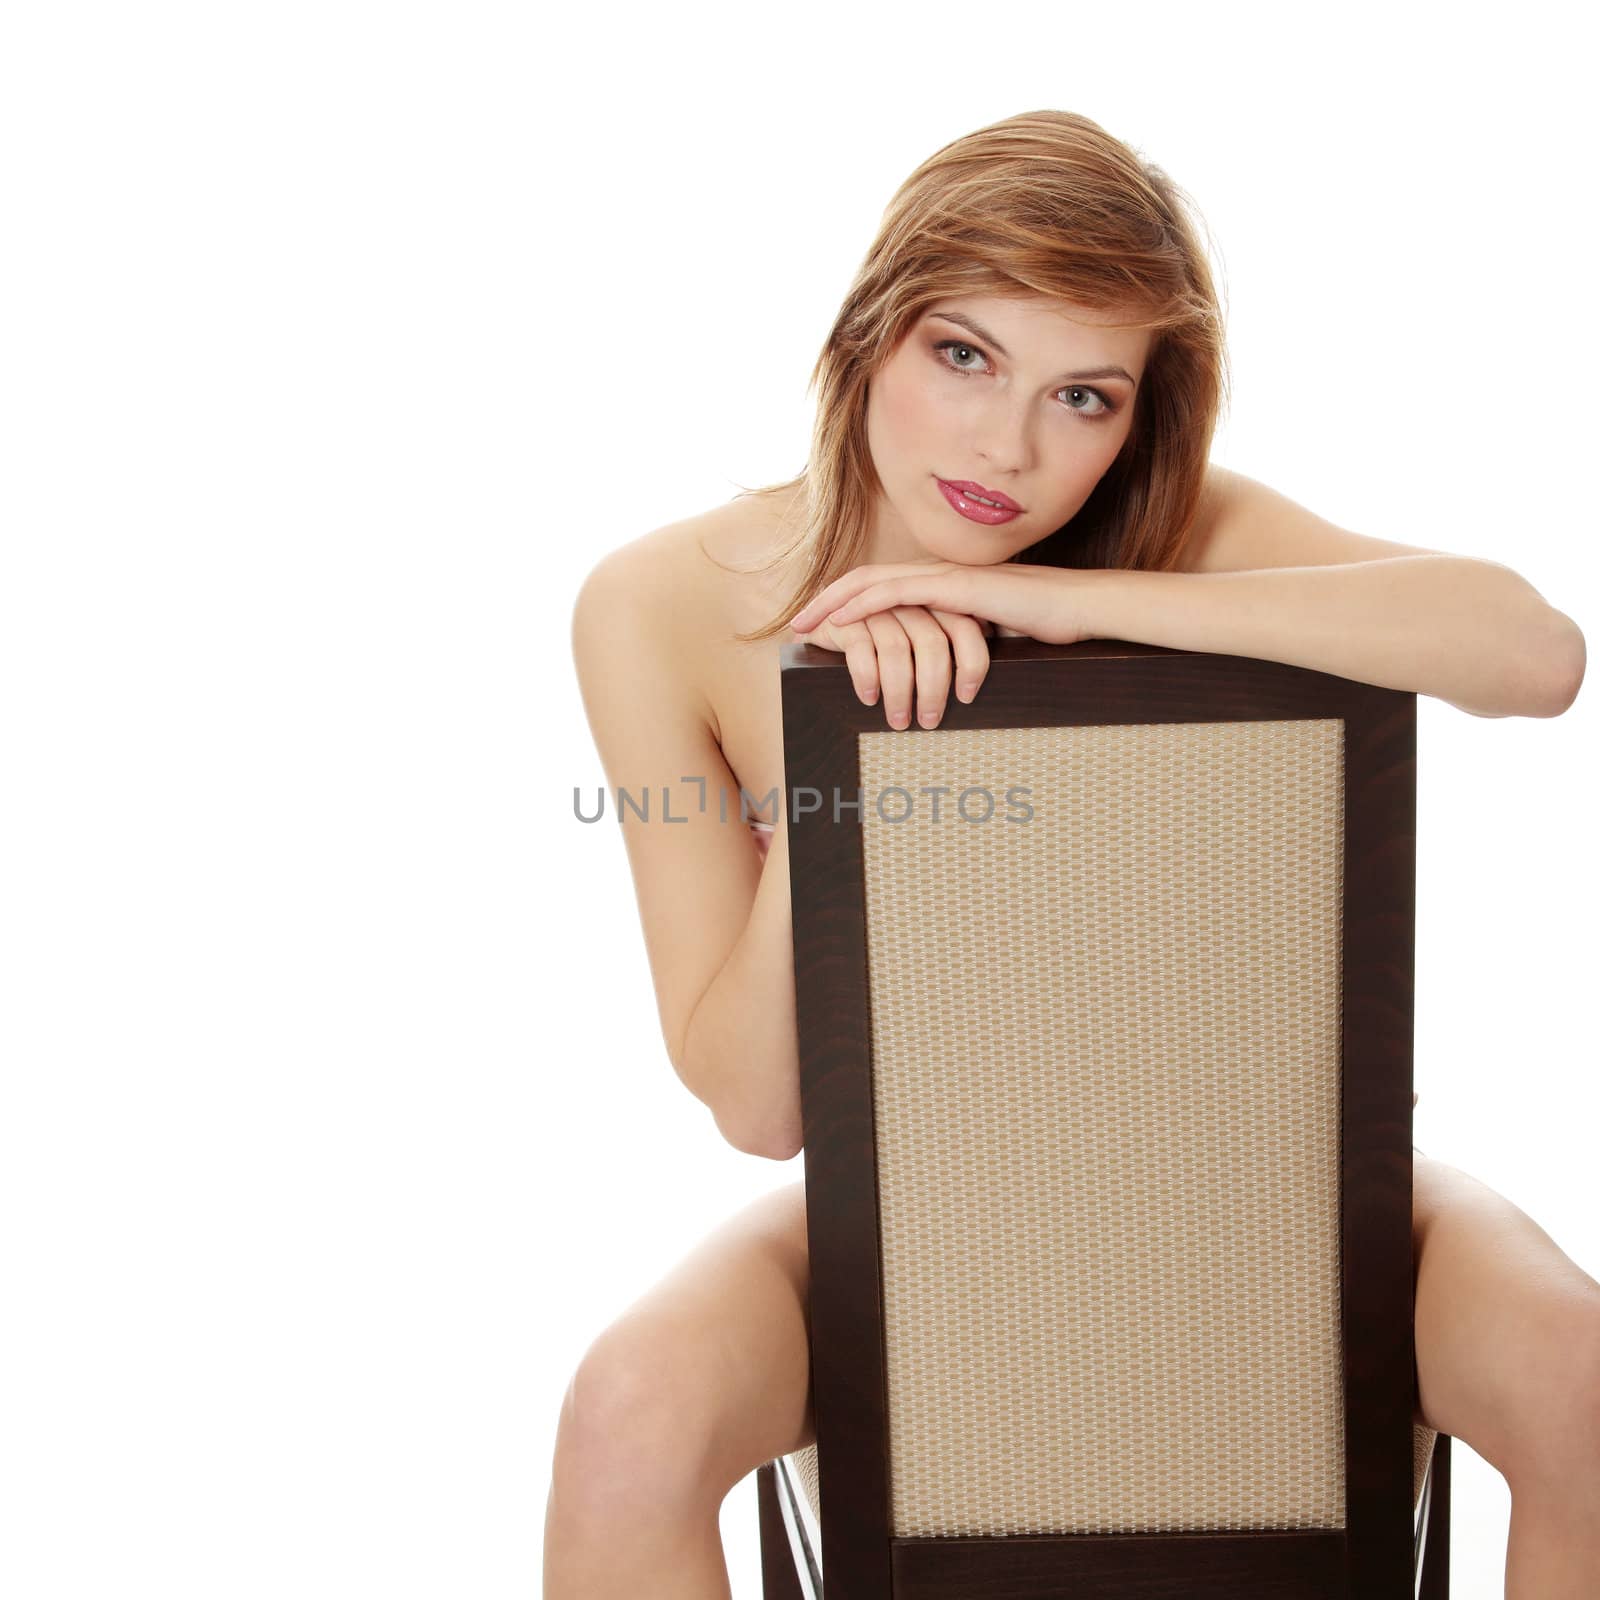 Teen girl in elegant make-up sitting on chair by BDS